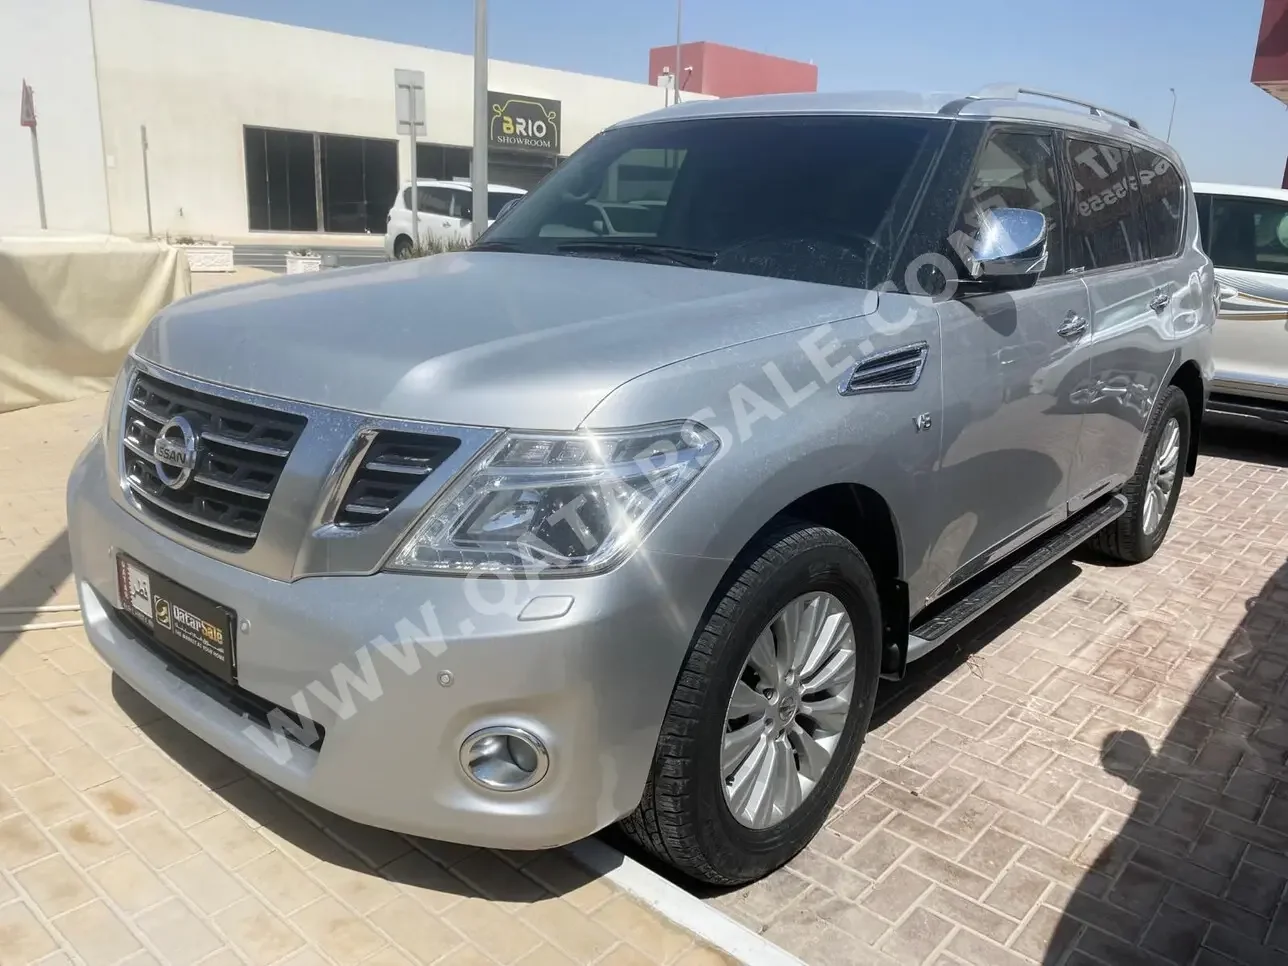 Nissan  Patrol  LE  2017  Automatic  92,000 Km  8 Cylinder  Four Wheel Drive (4WD)  SUV  Silver